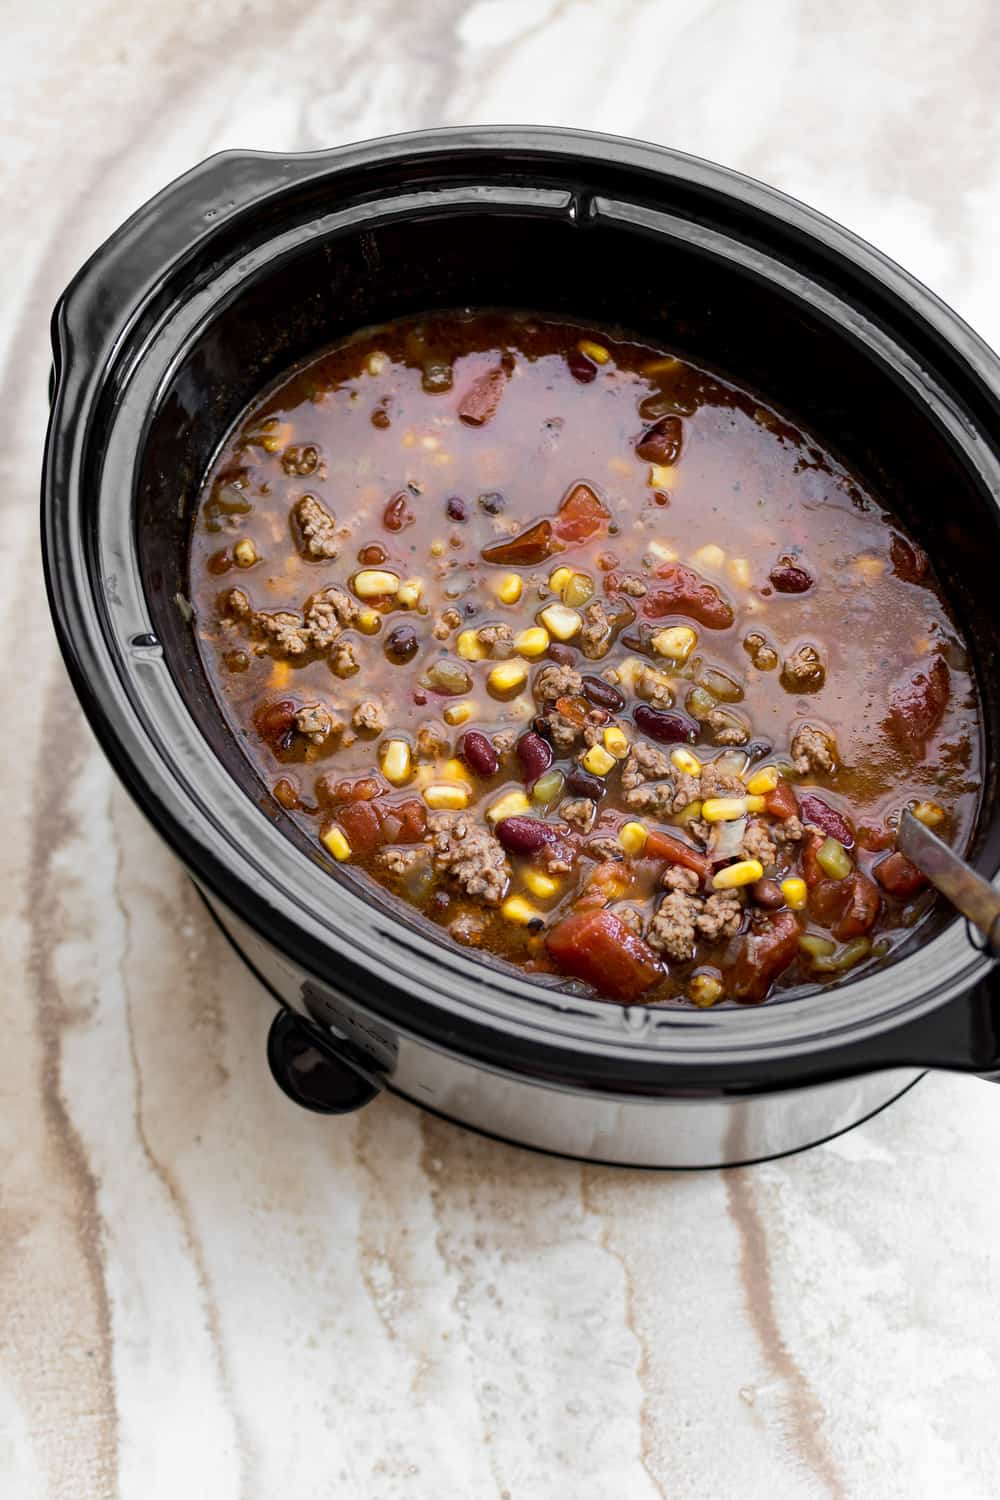 Crockpot Taco Soup in the slow cooker.